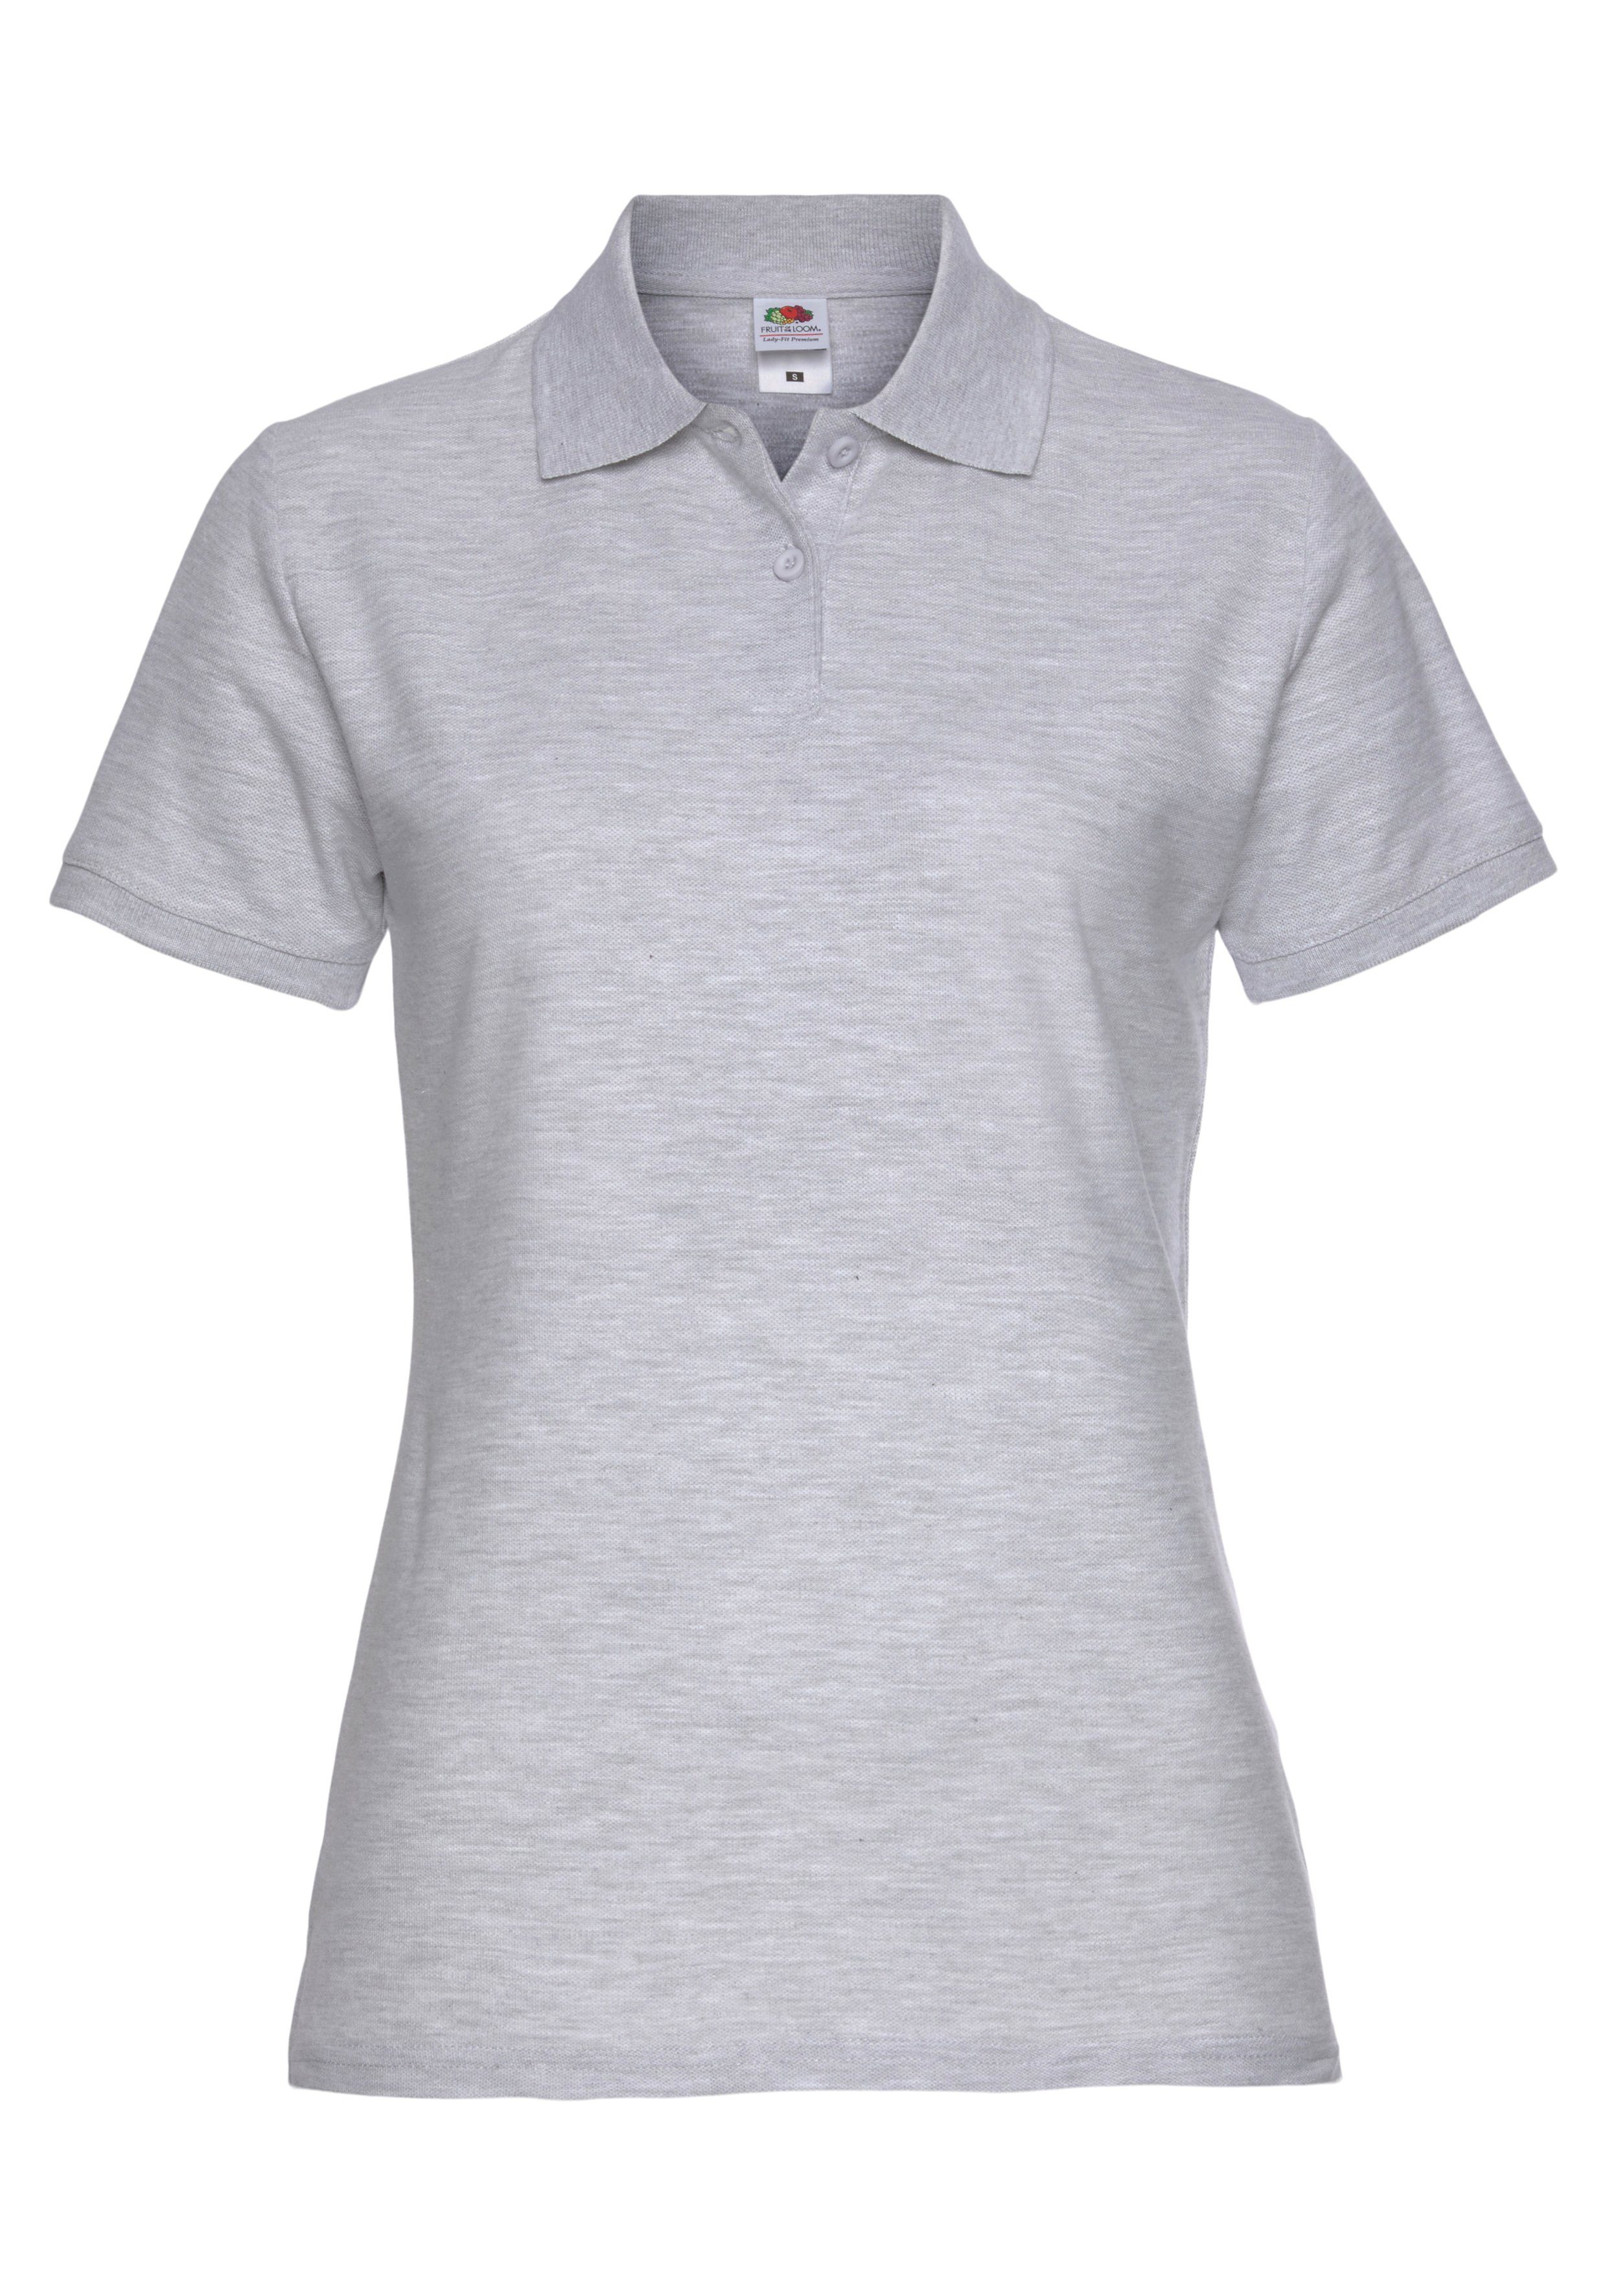 Lady-Fit Premium graumeliert Poloshirt Polo of the Fruit Loom